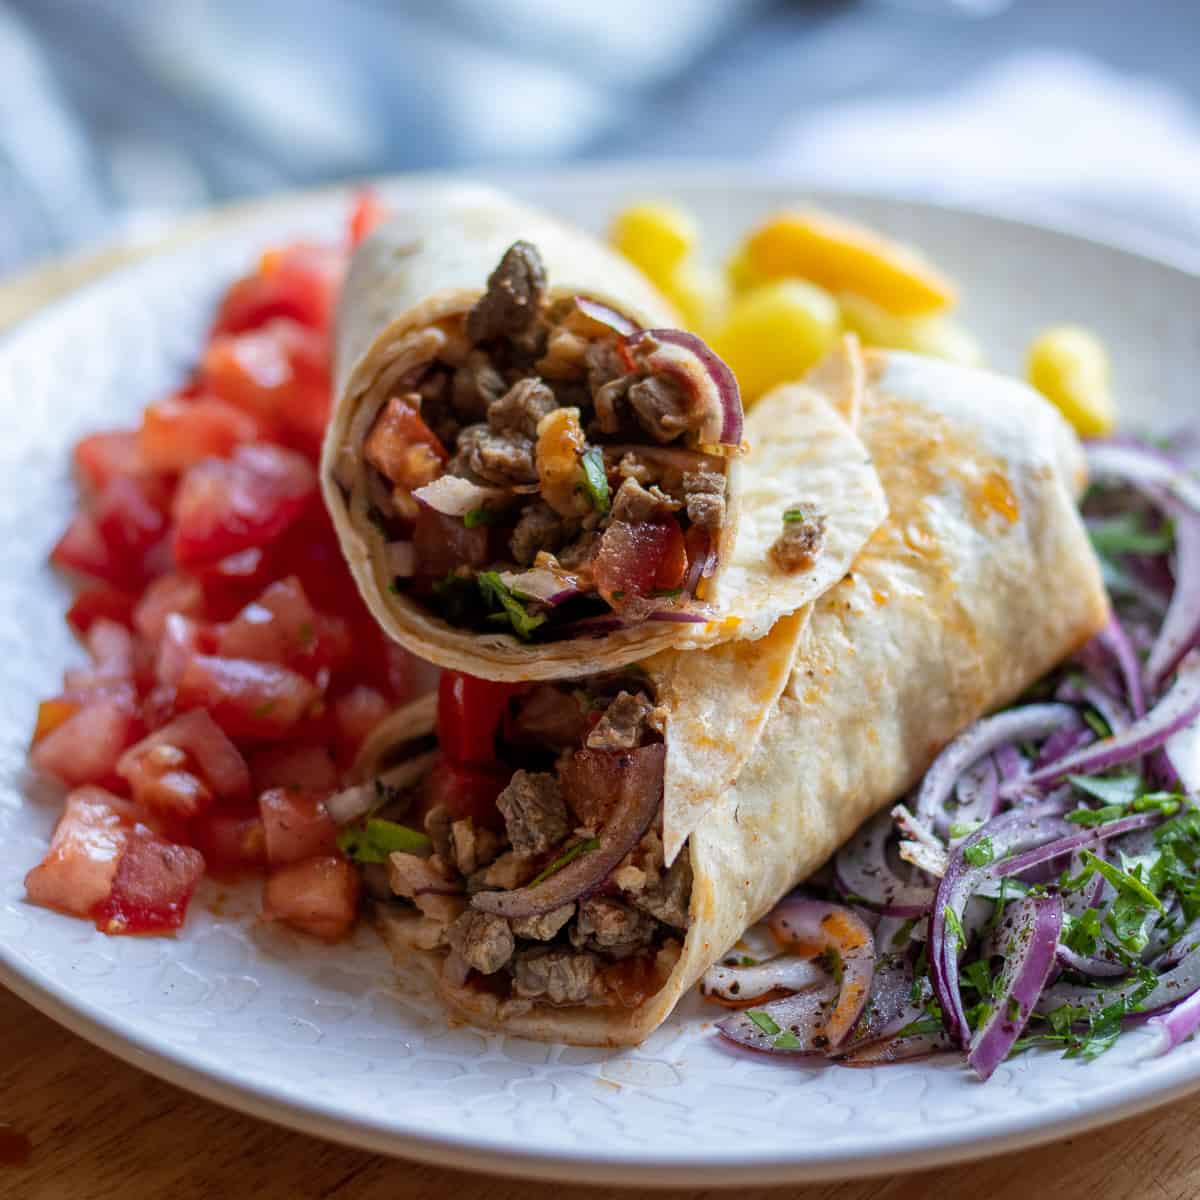 Tantuni is served with chopped tomatoes, onion salad and pickled chillies